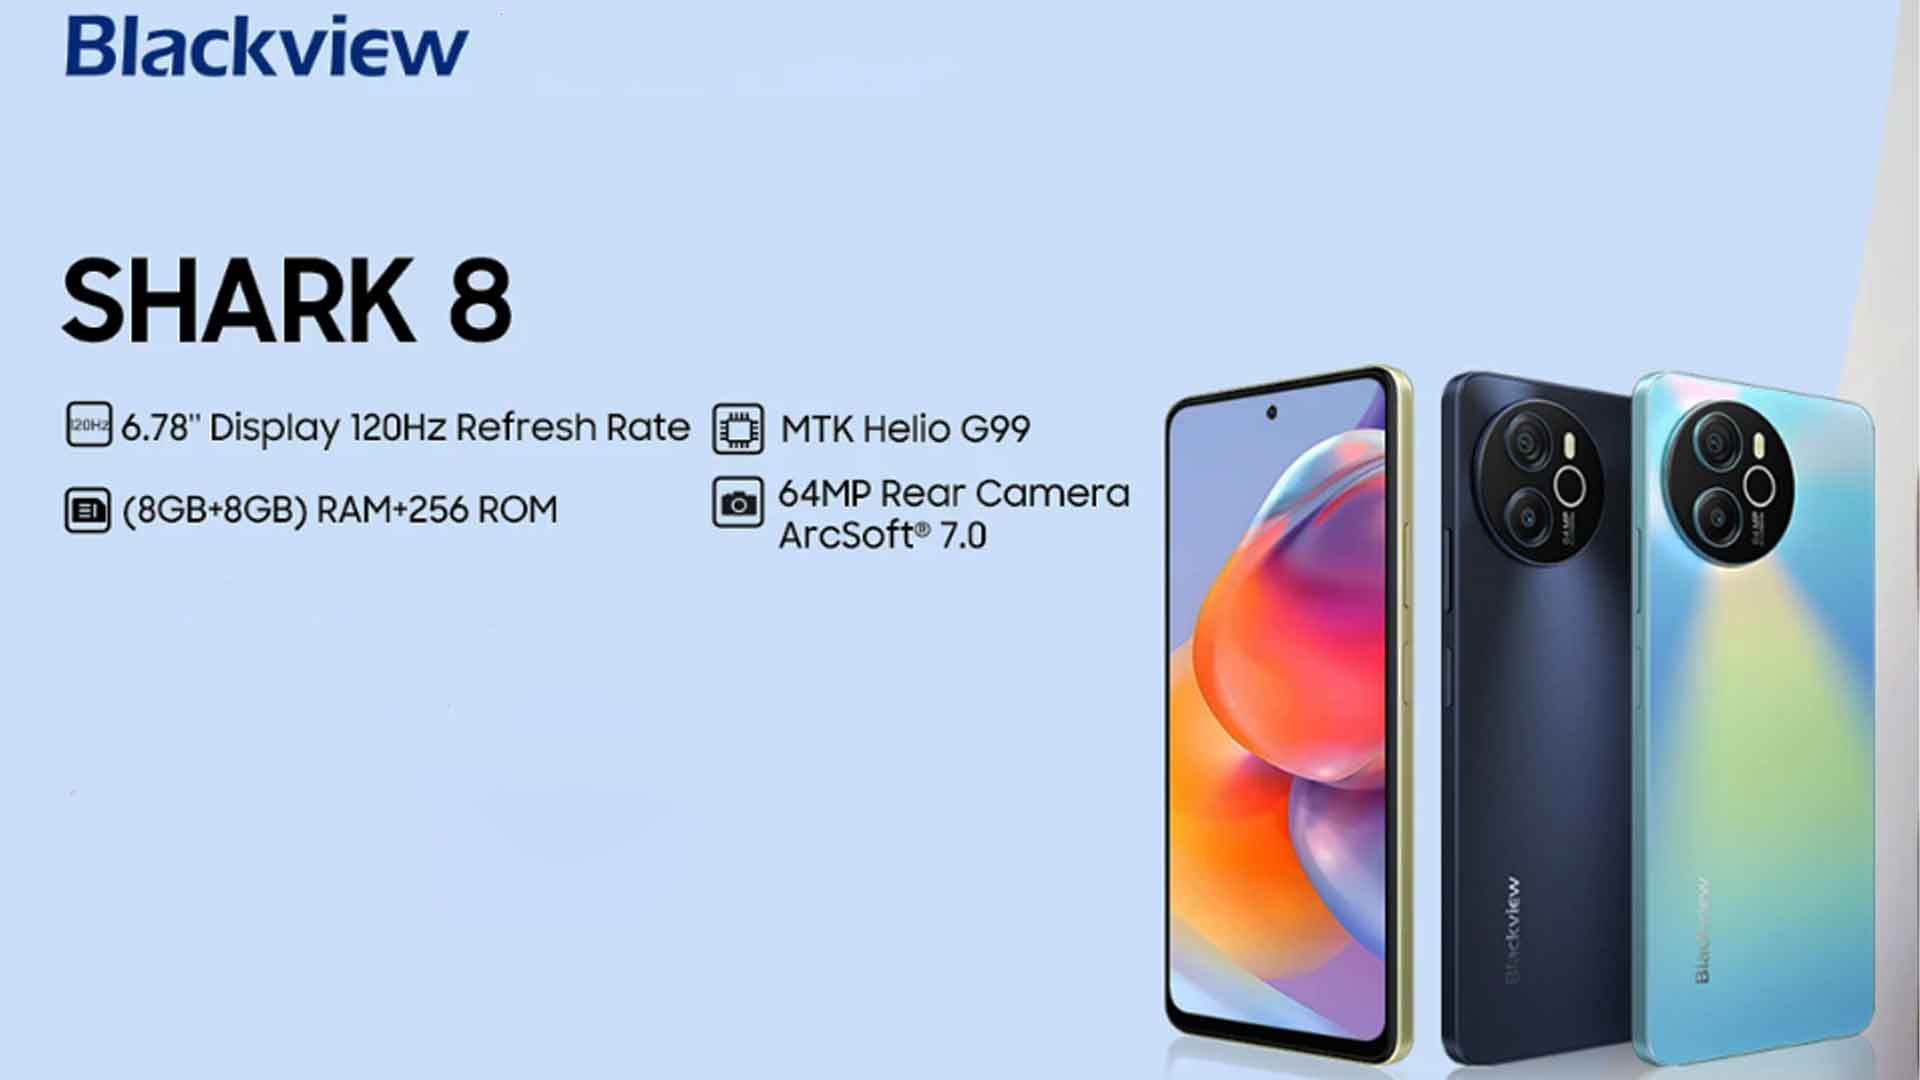 Blackview SHARK 8 Price is at $119.16 with G99, 120Hz 2.4K Display, 16GB  RAM, and 64MP • DealsNowToday